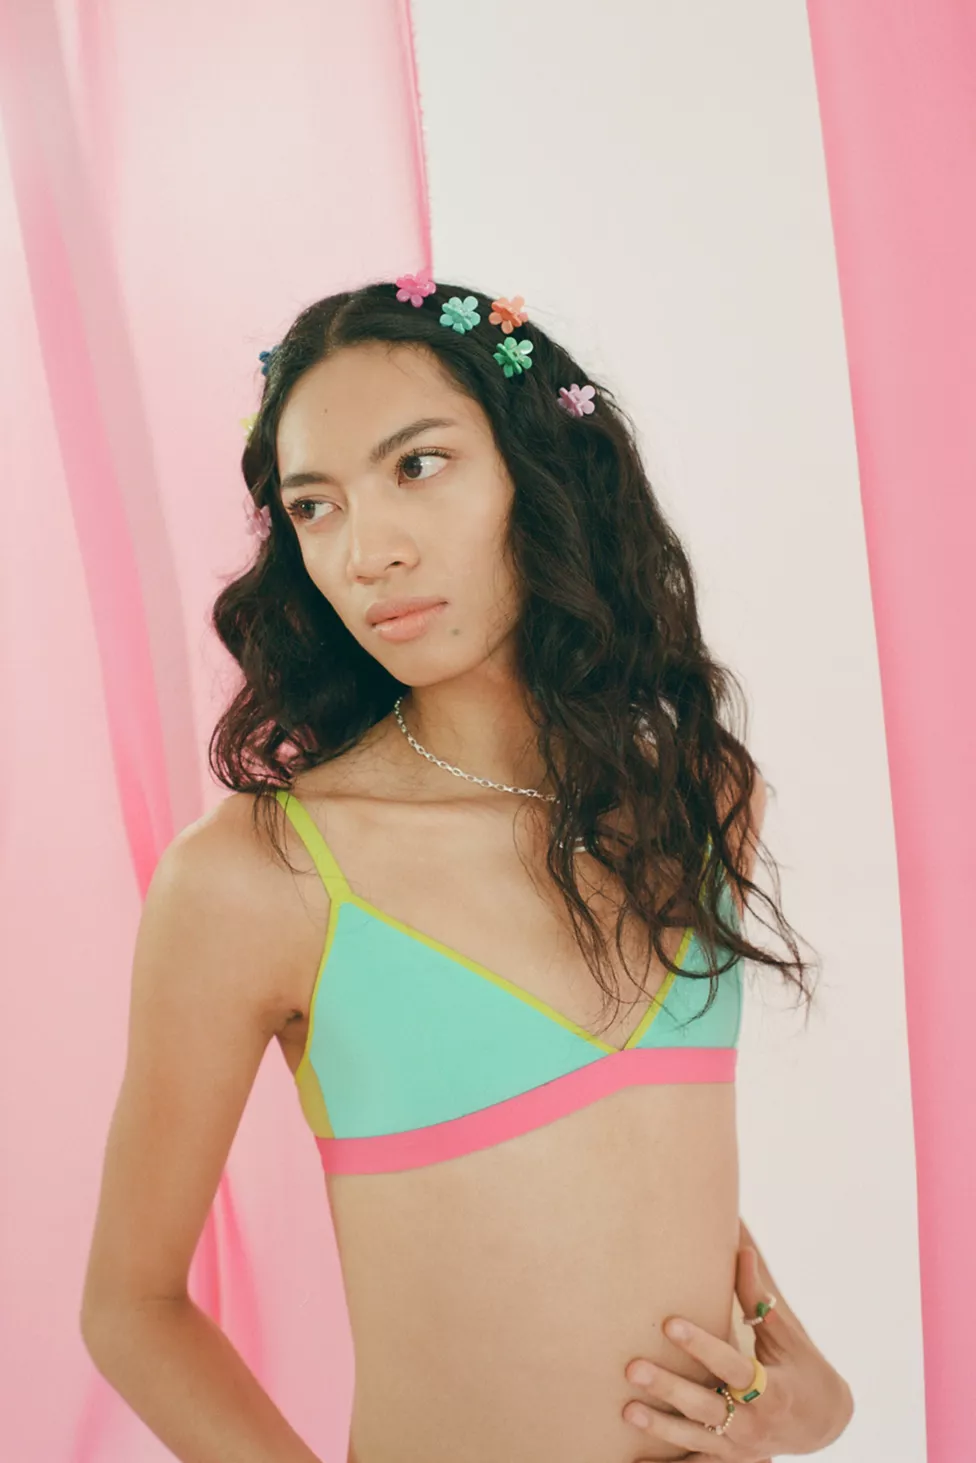 Parade x Urban Outfitters Launches Fun Underwear Collab